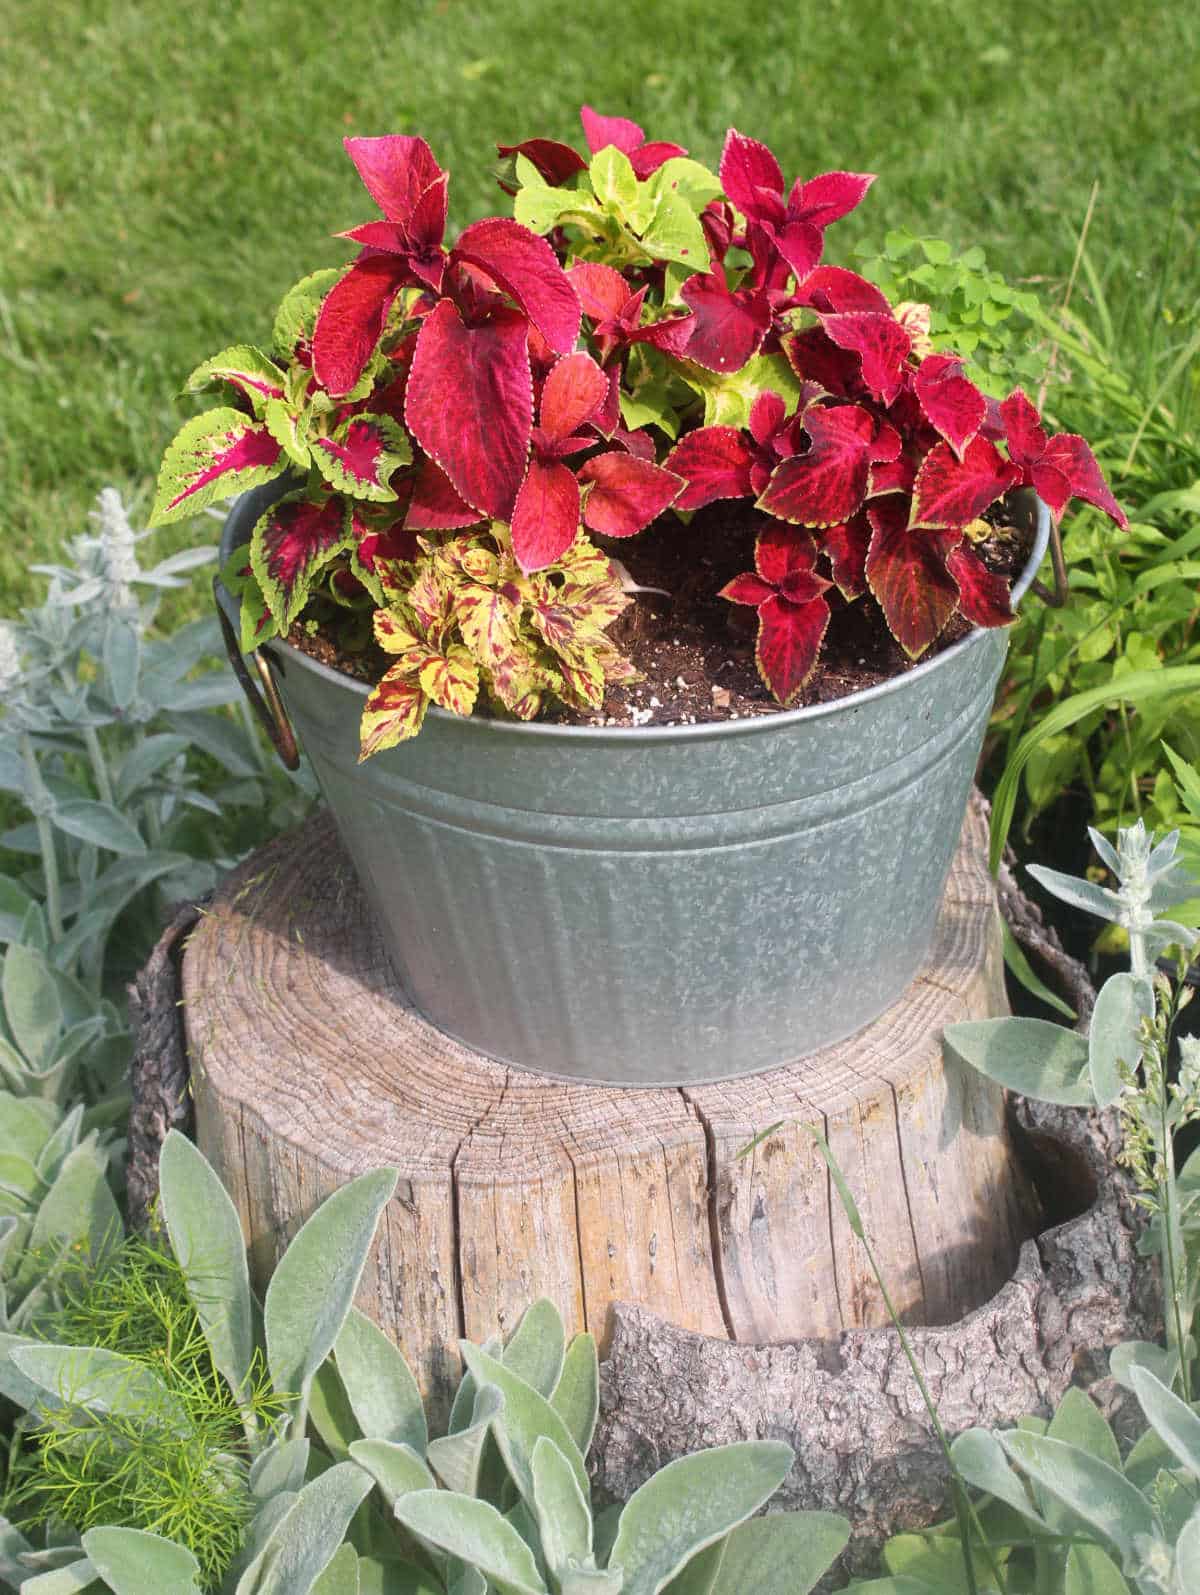 brightly colored coleus plant in a metal tub on a tree stump.